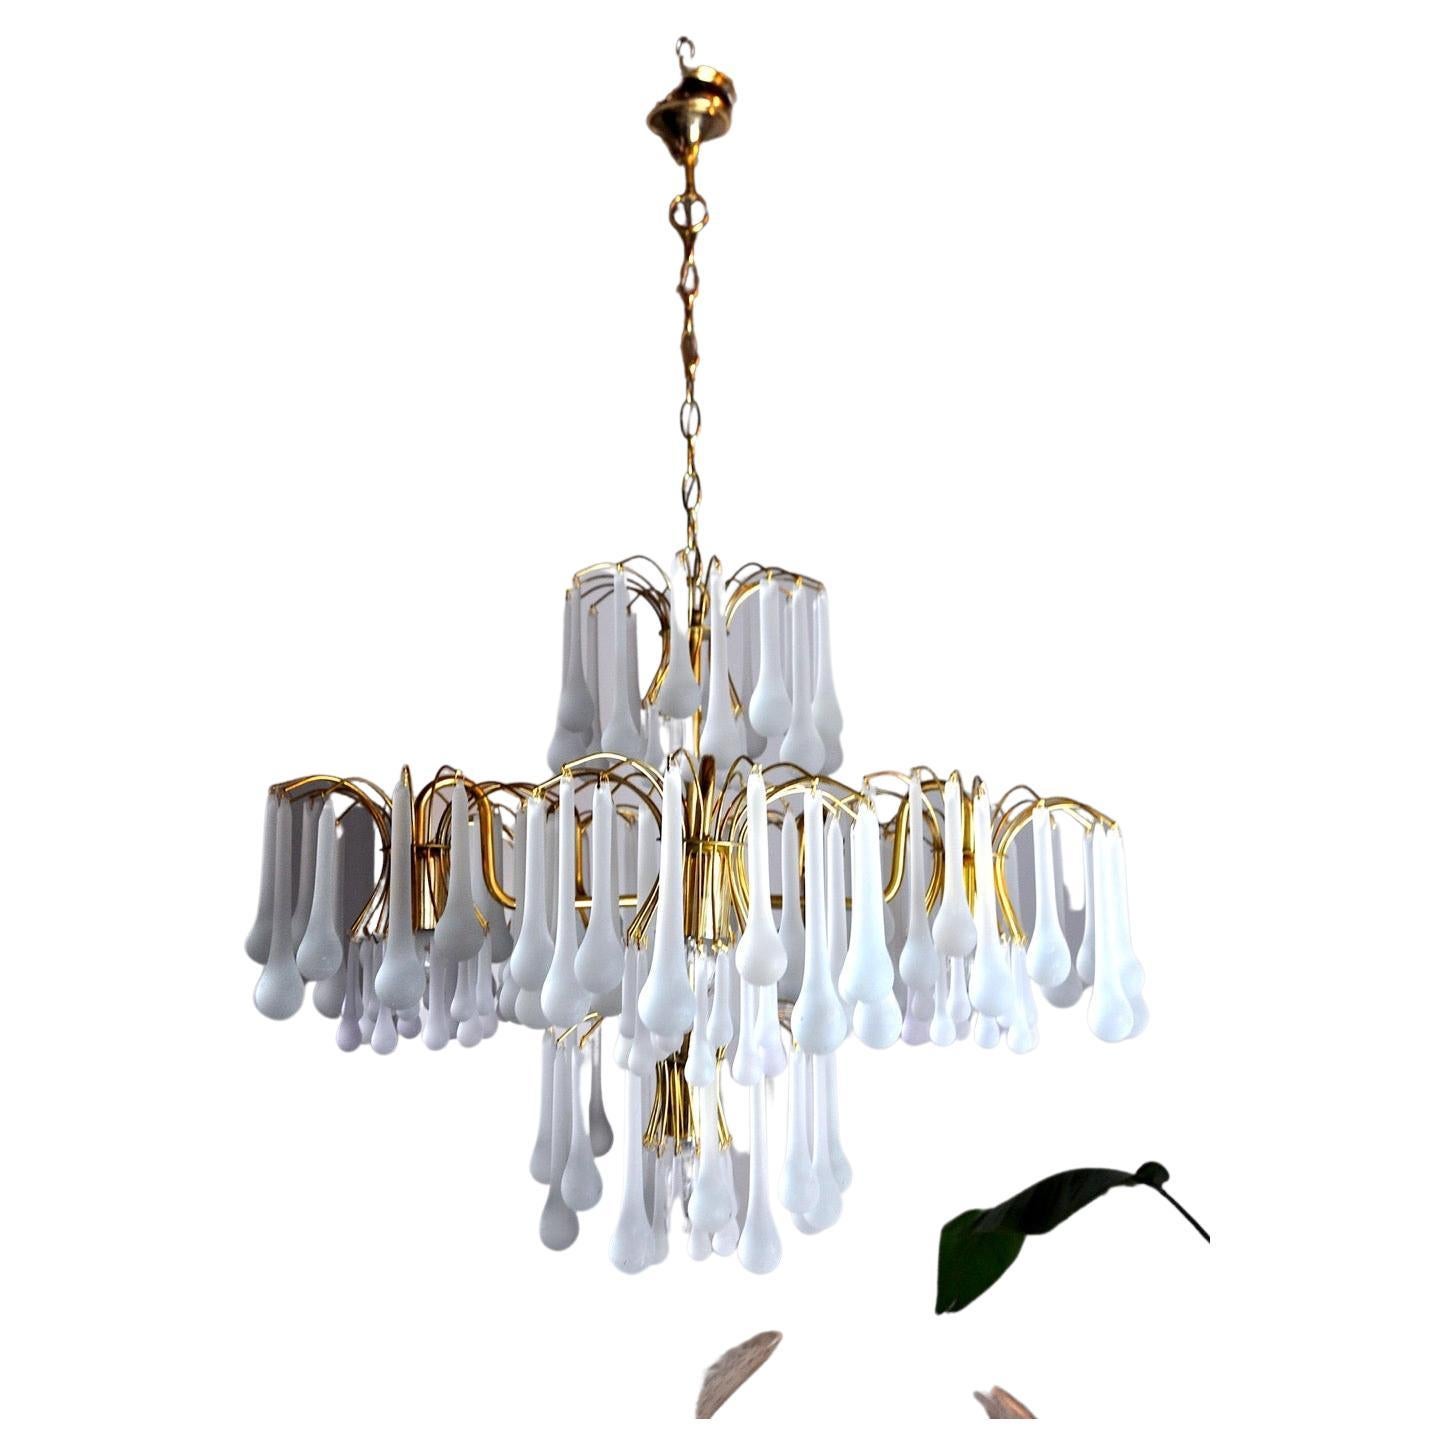 Drop Chandelier by Venini, 5 Arms, Murano Glass, Italy, 1960 For Sale